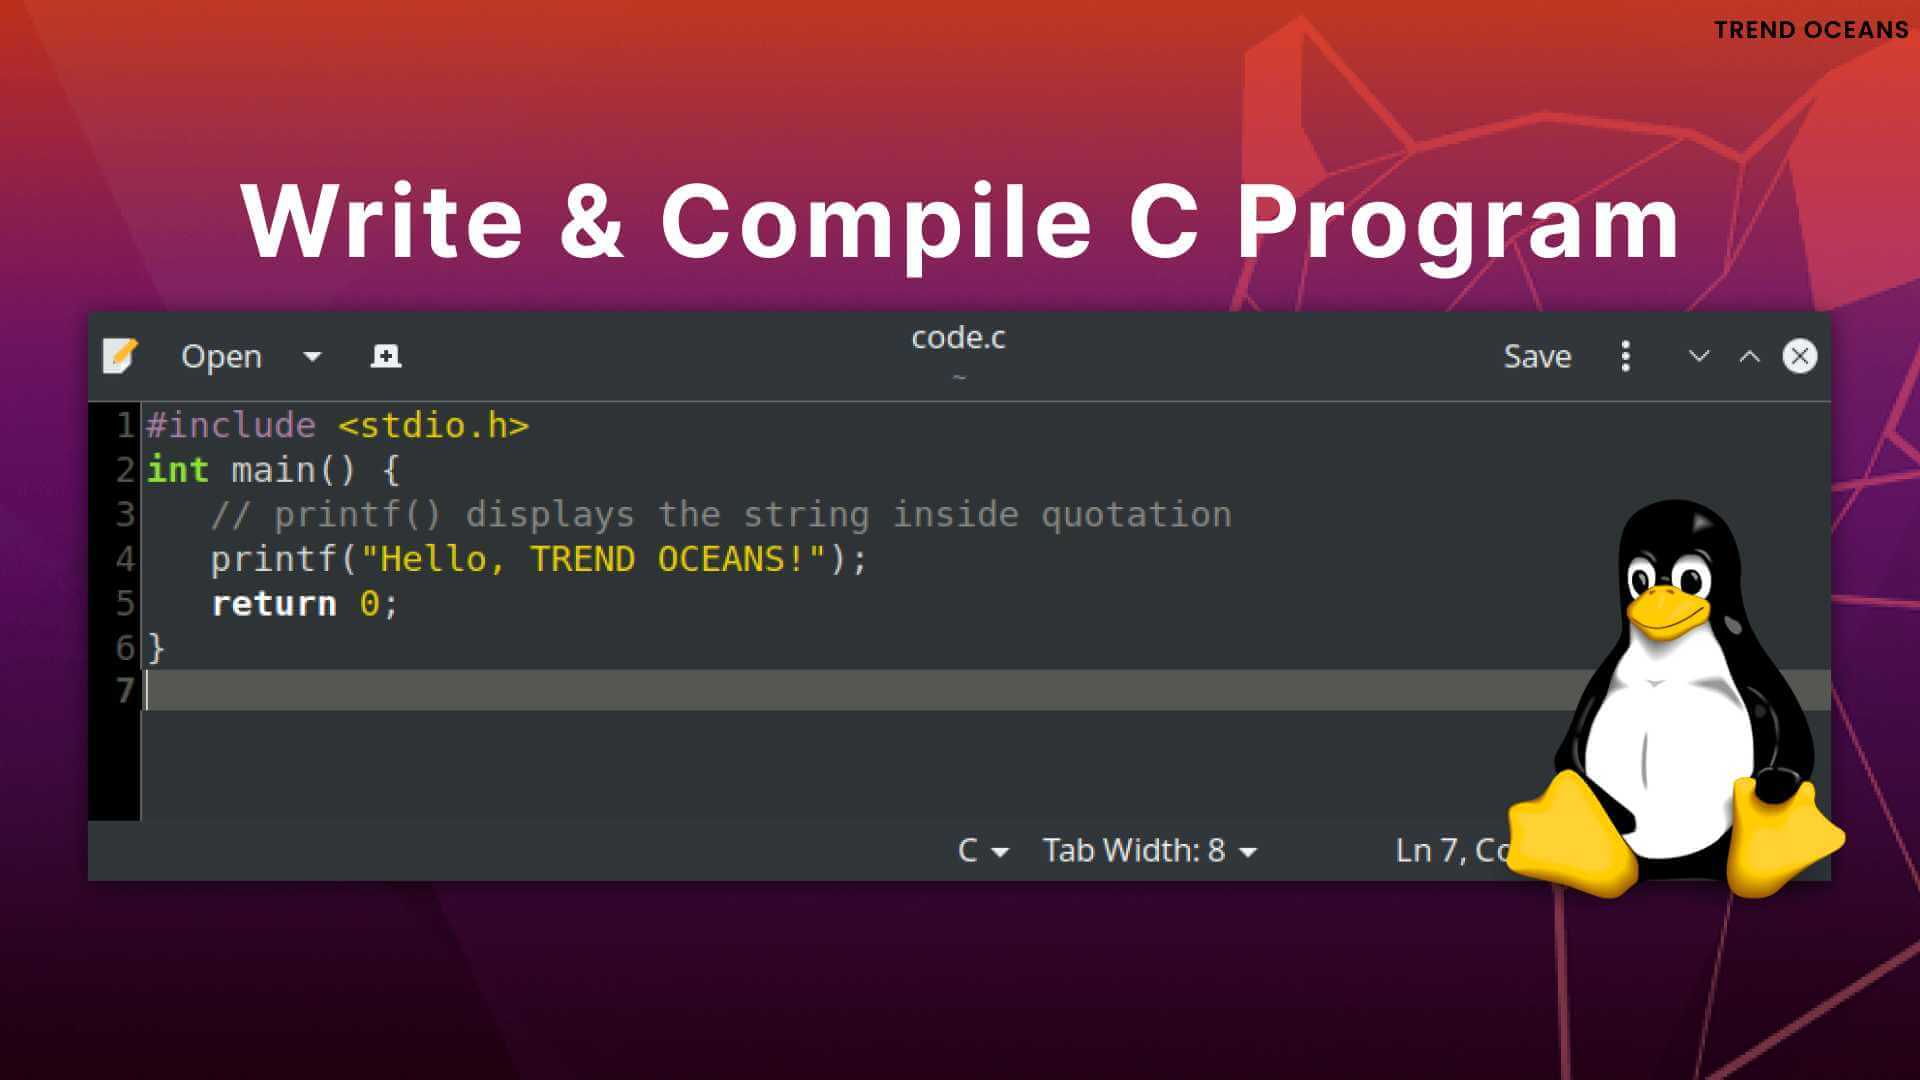 How to Write and Compile a C Program in Linux